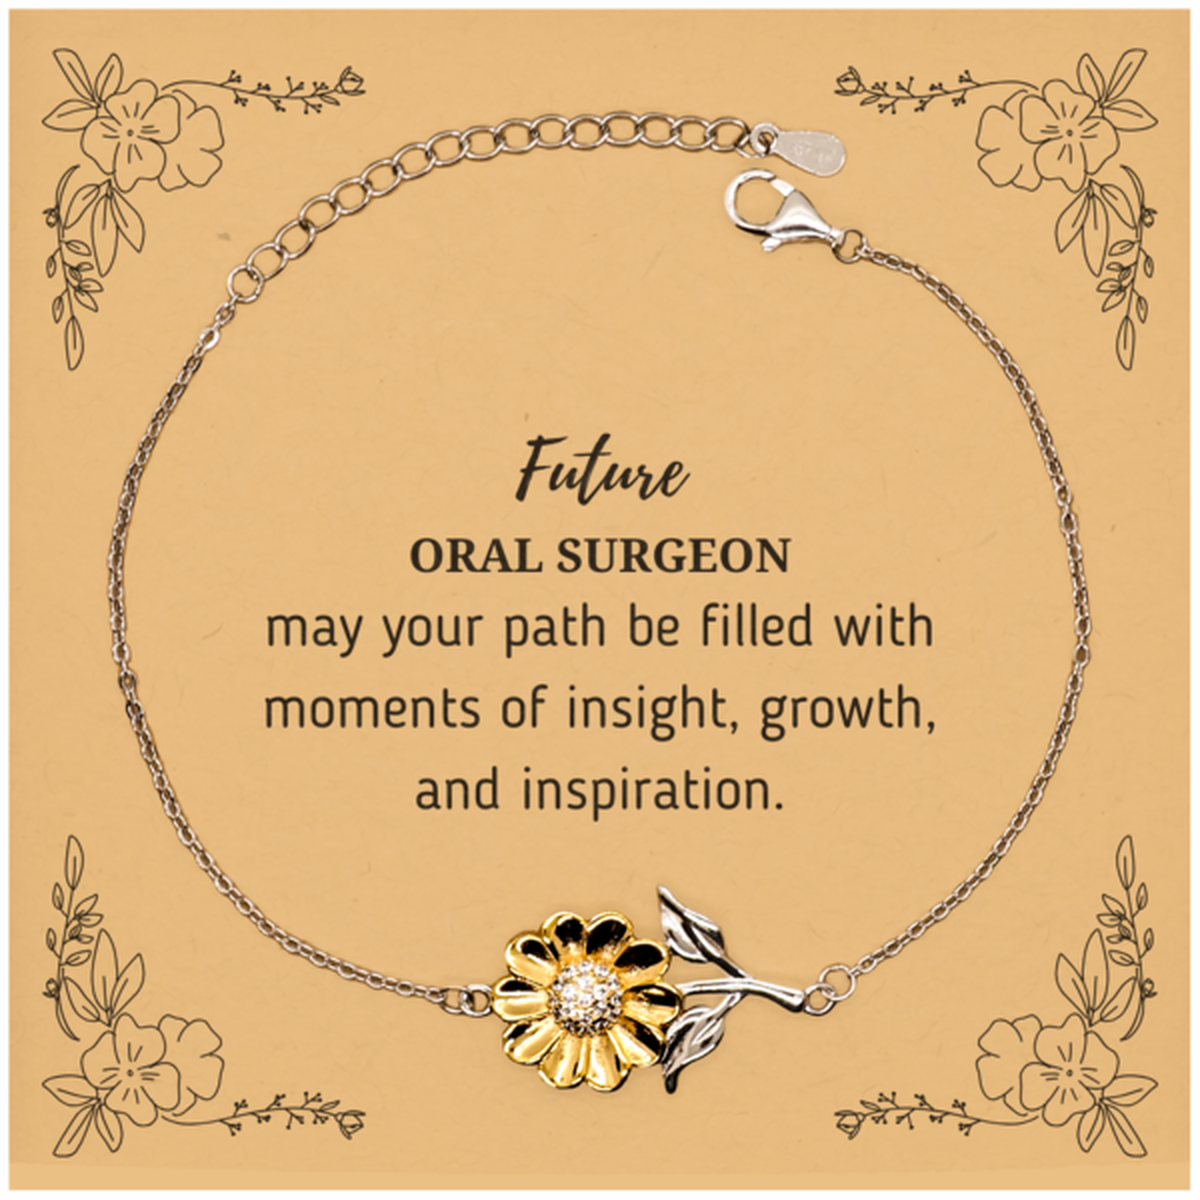 Future Oral Surgeon Gifts, May your path be filled with moments of insight, Graduation Gifts for New Oral Surgeon, Christmas Unique Sunflower Bracelet For Men, Women, Friends